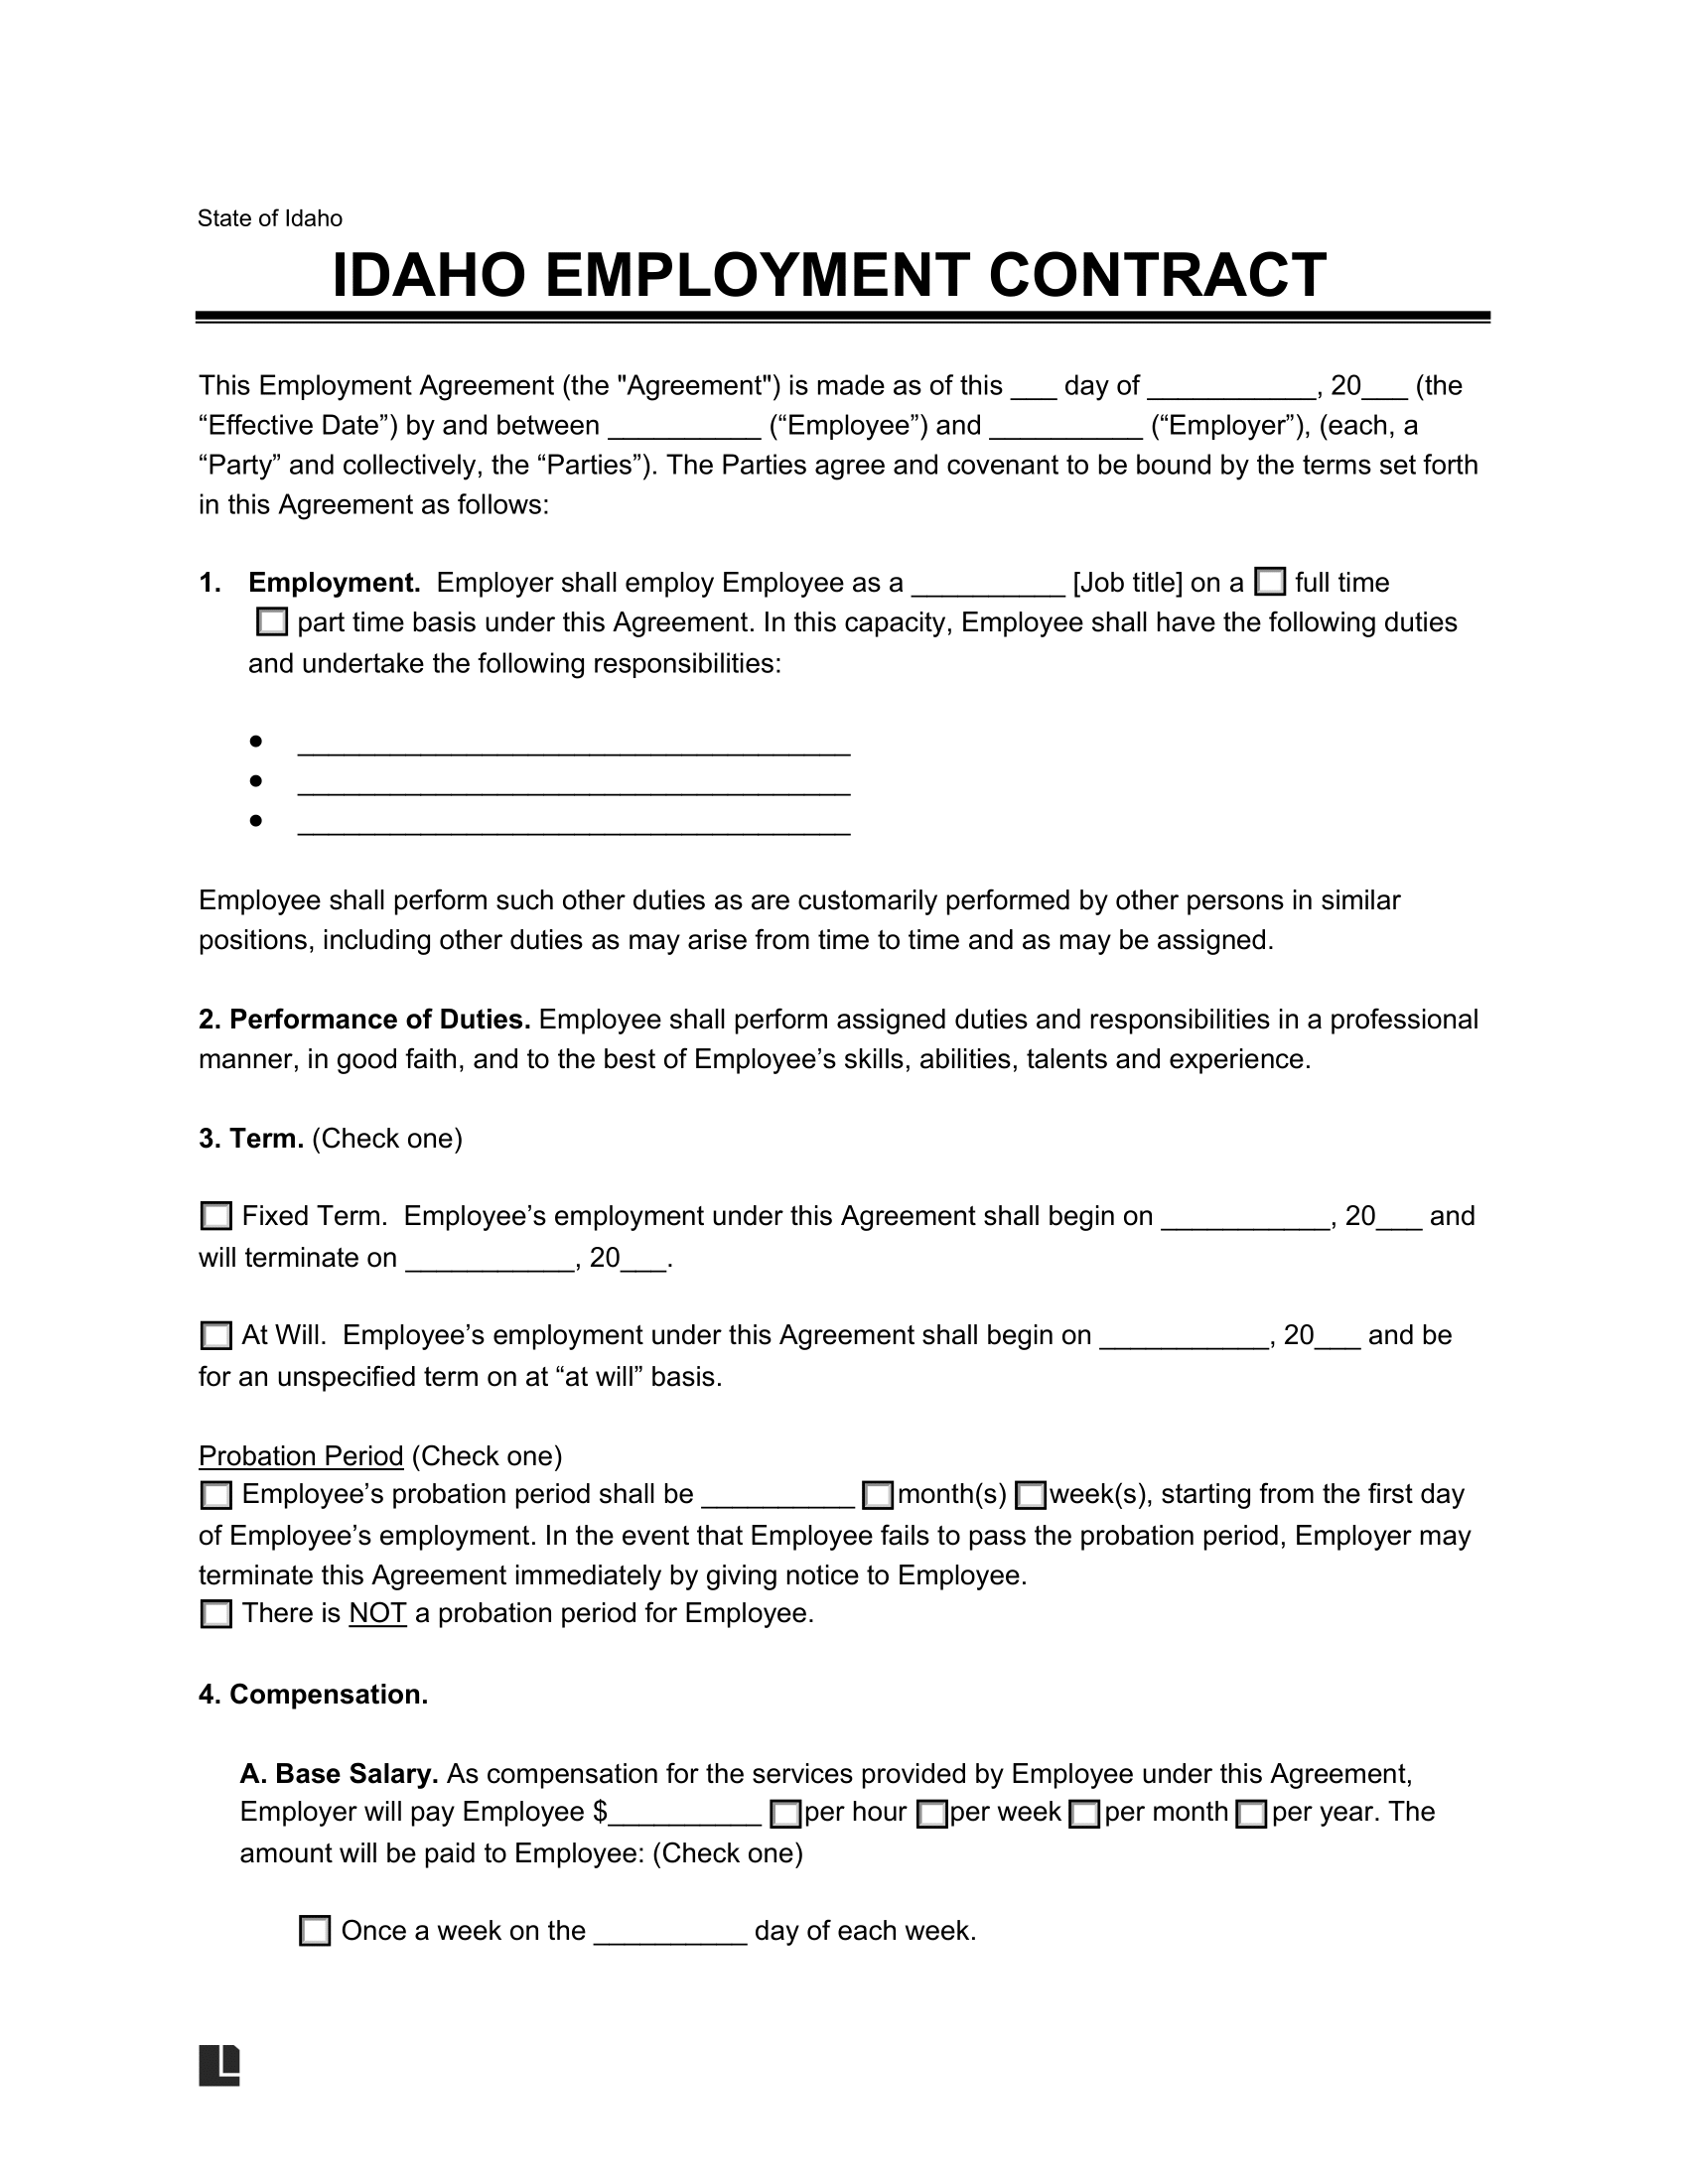 idaho employment contract template